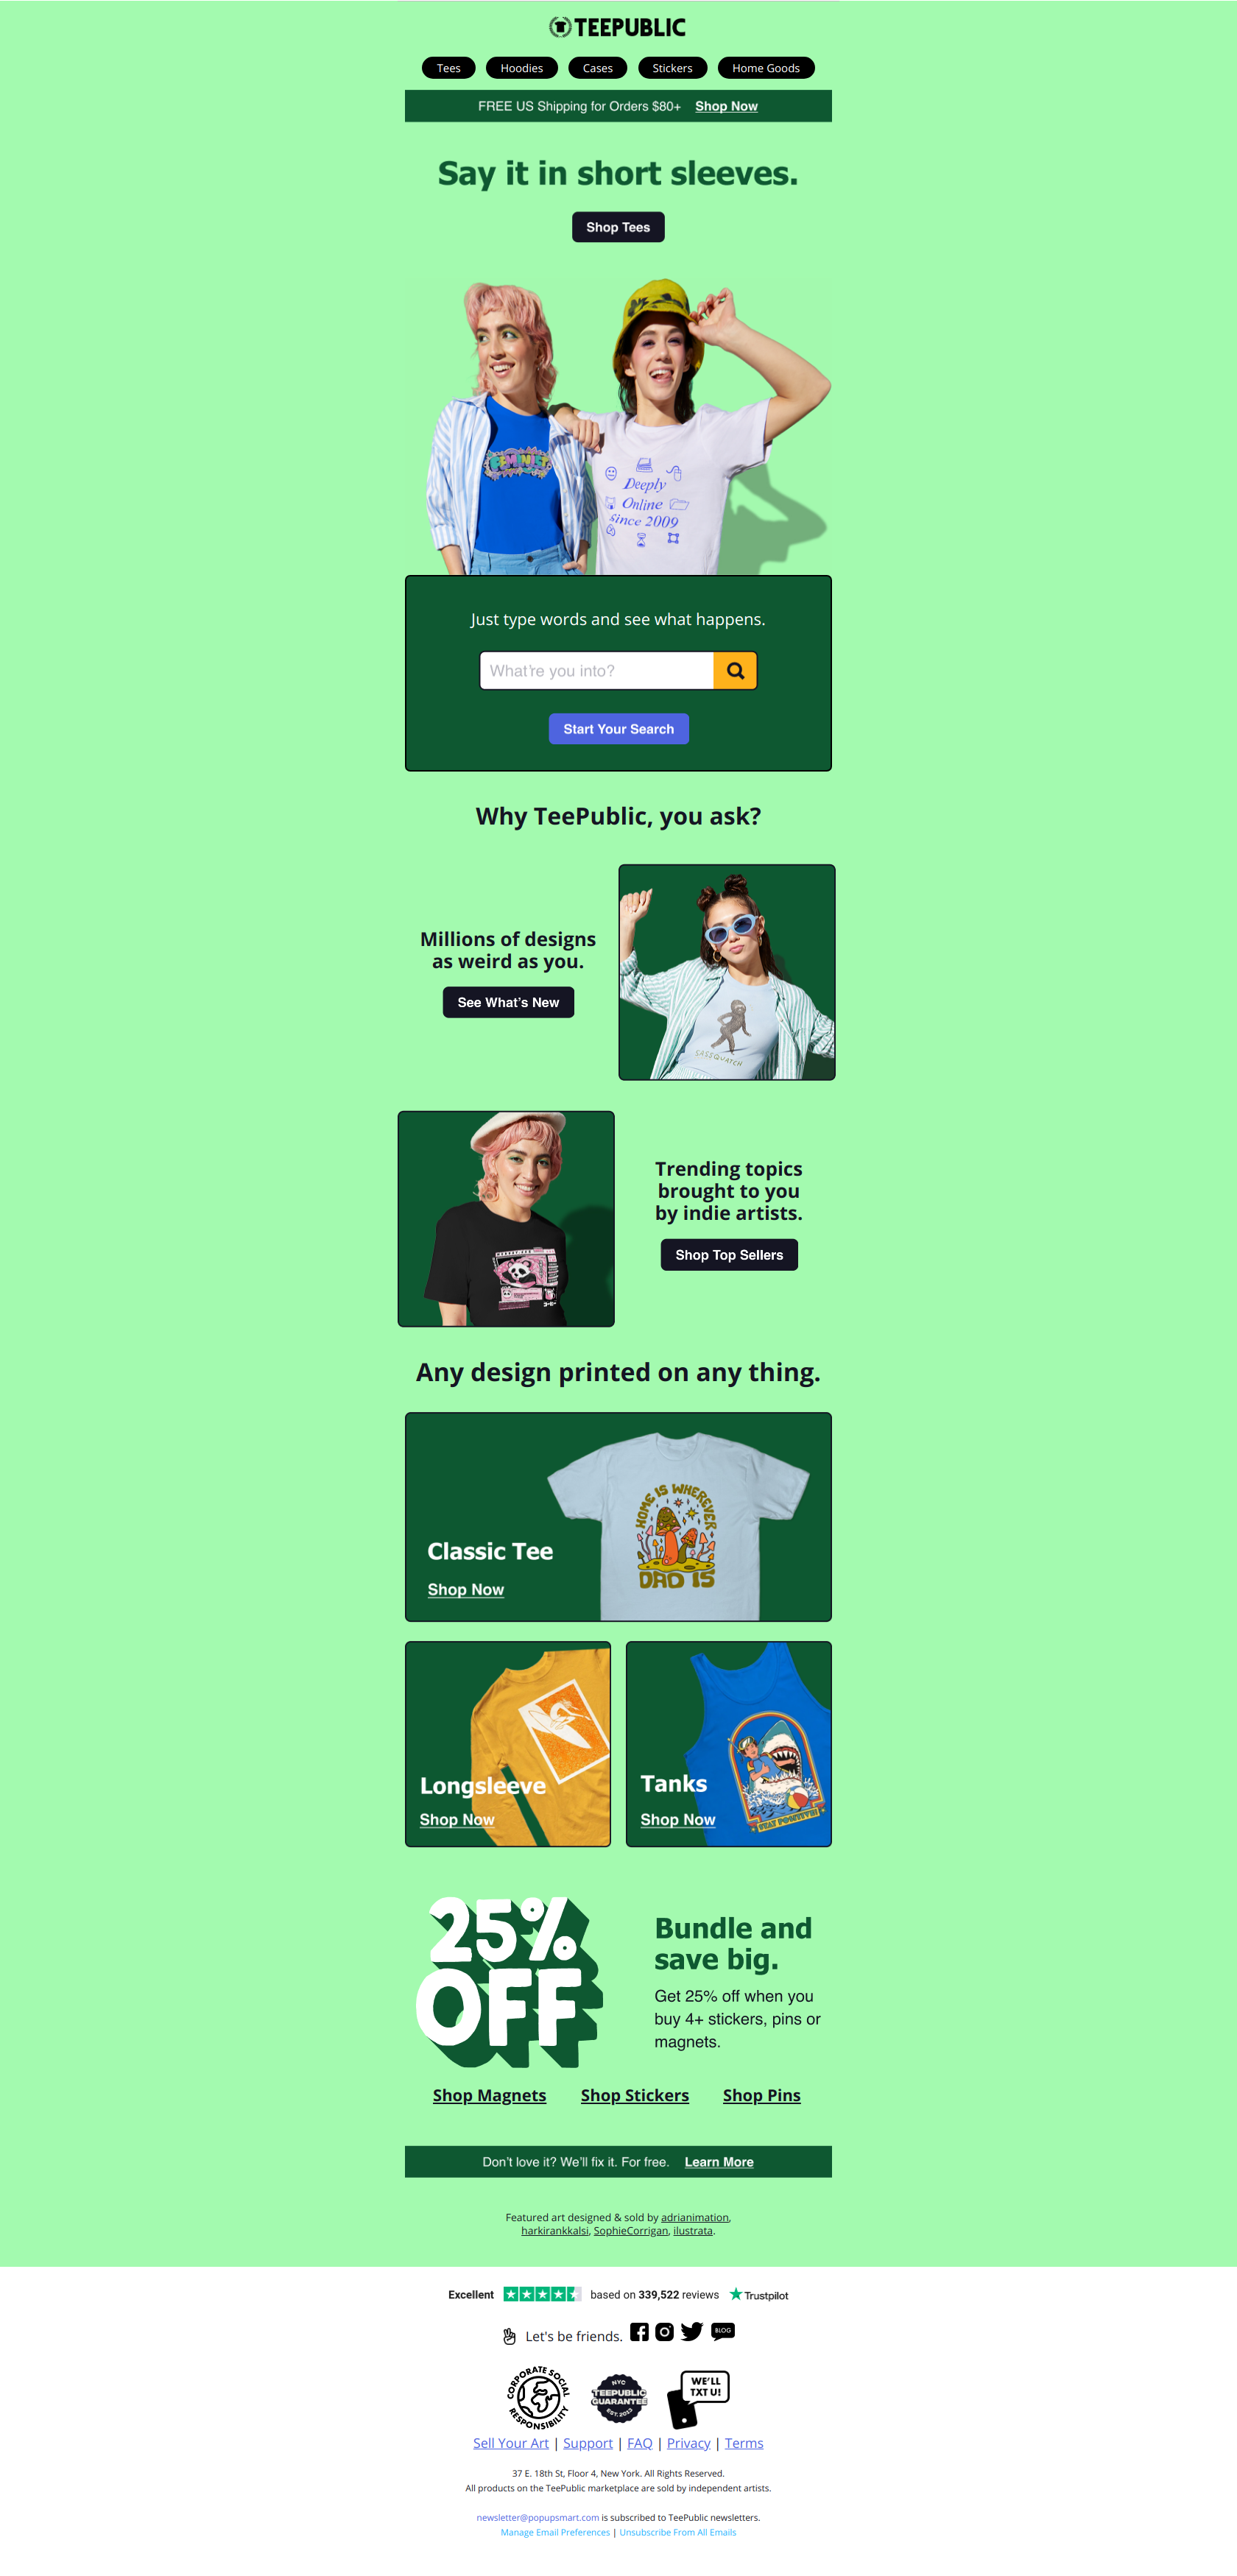 Share your interests with the world. - TeePublic Newsletter